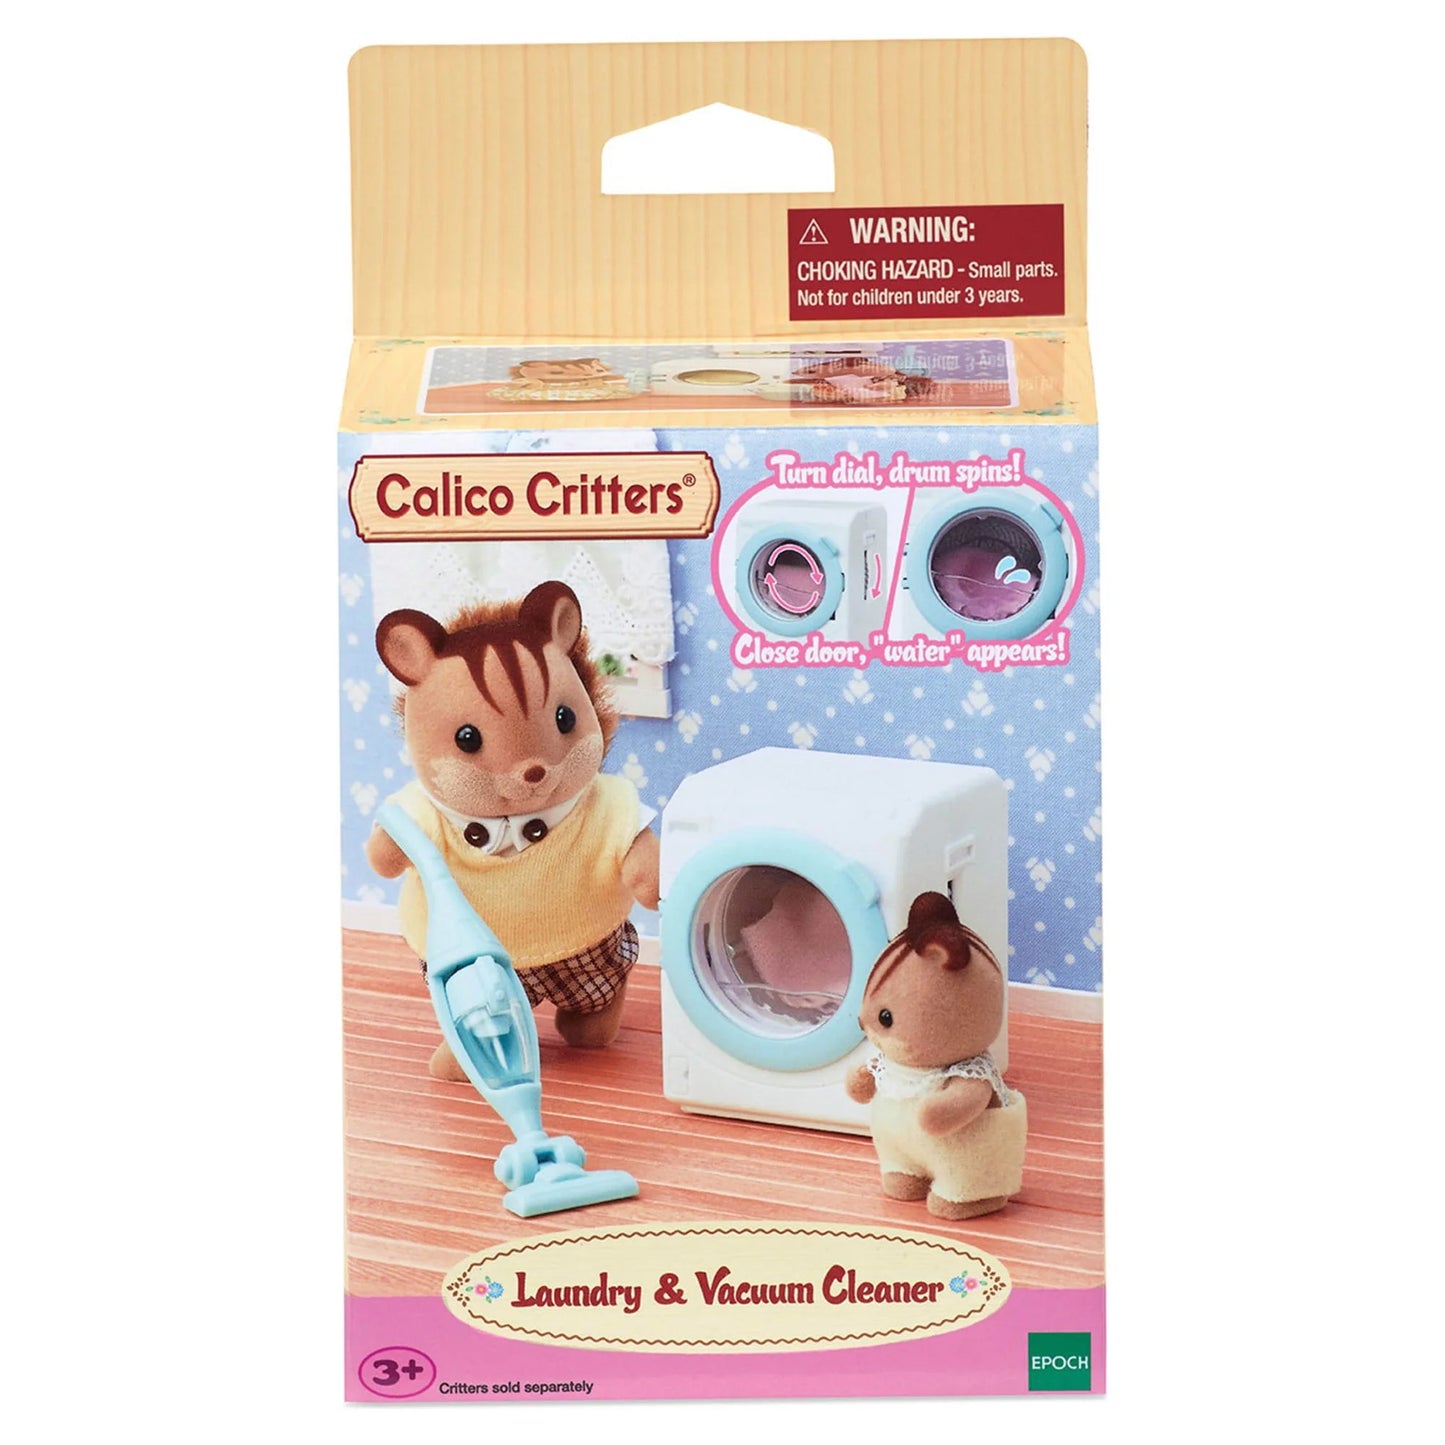 CALICO CRITTERS LAUNDRY AND VACUUM CLEANER